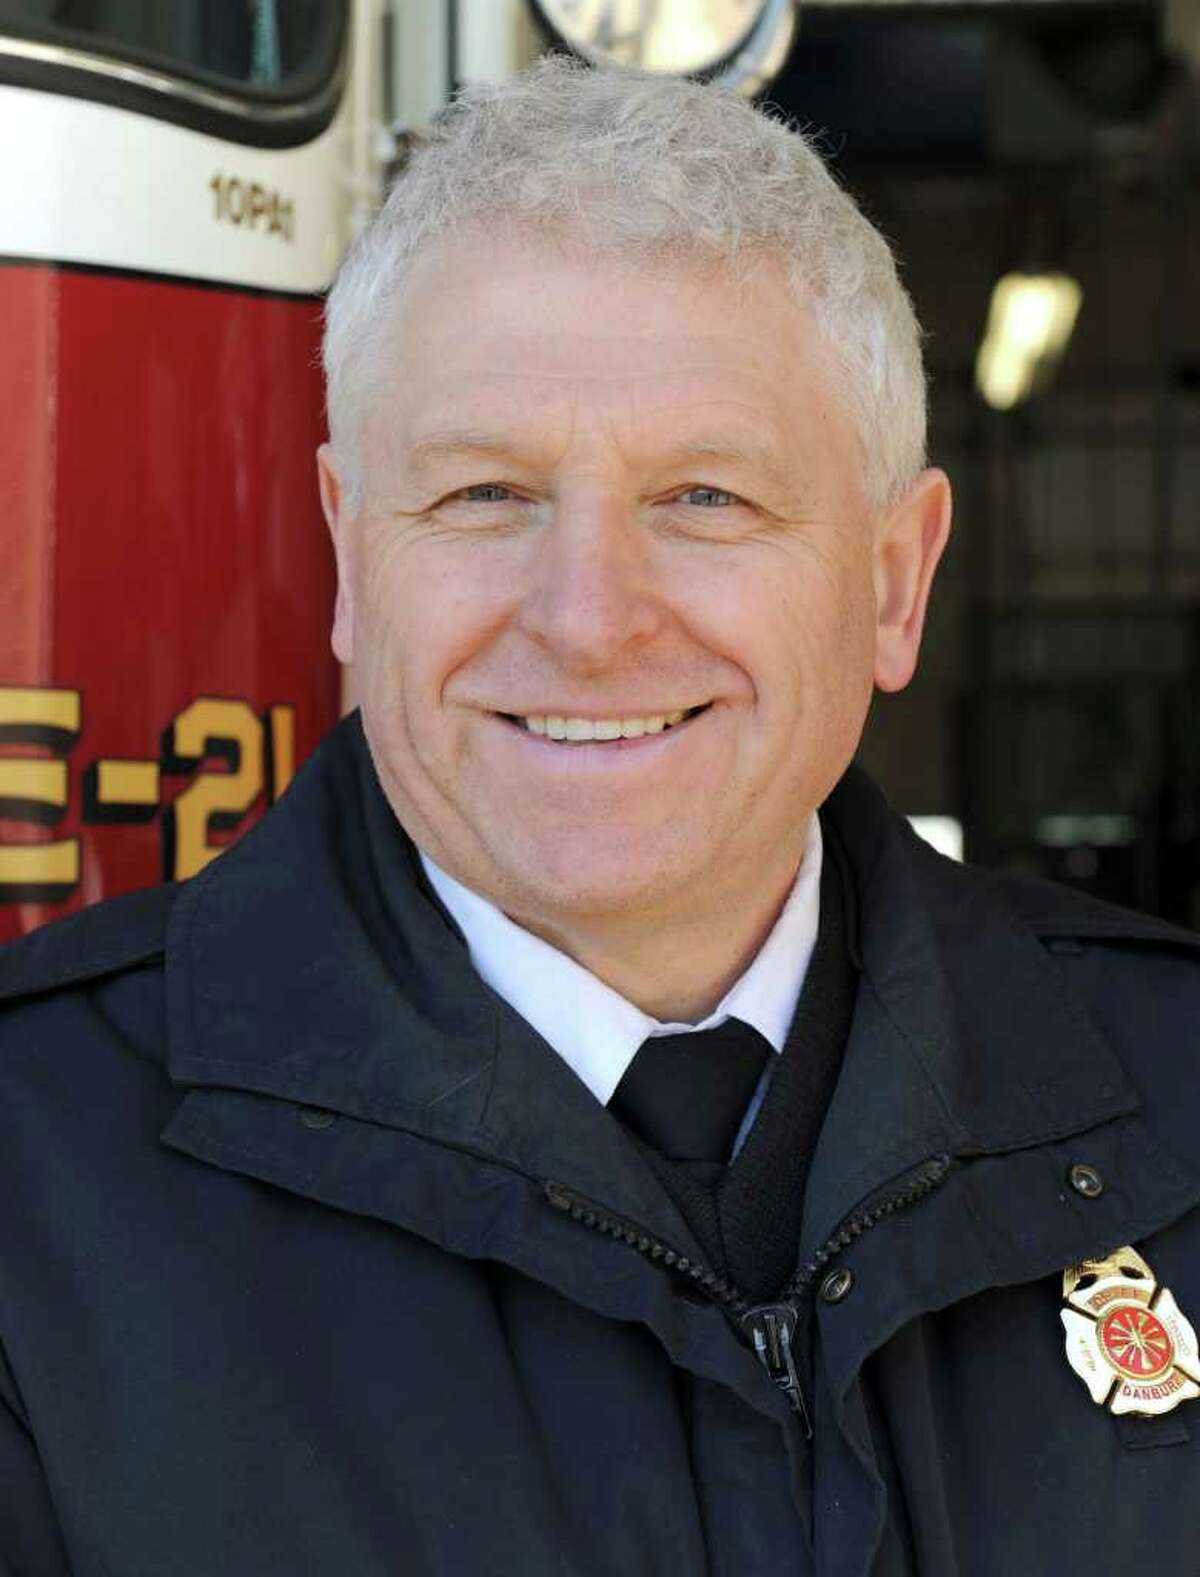 Danbury Fire Chief Geoff Herald is photographed at headquarters on New Street Friday, Feb. 11, 2011.